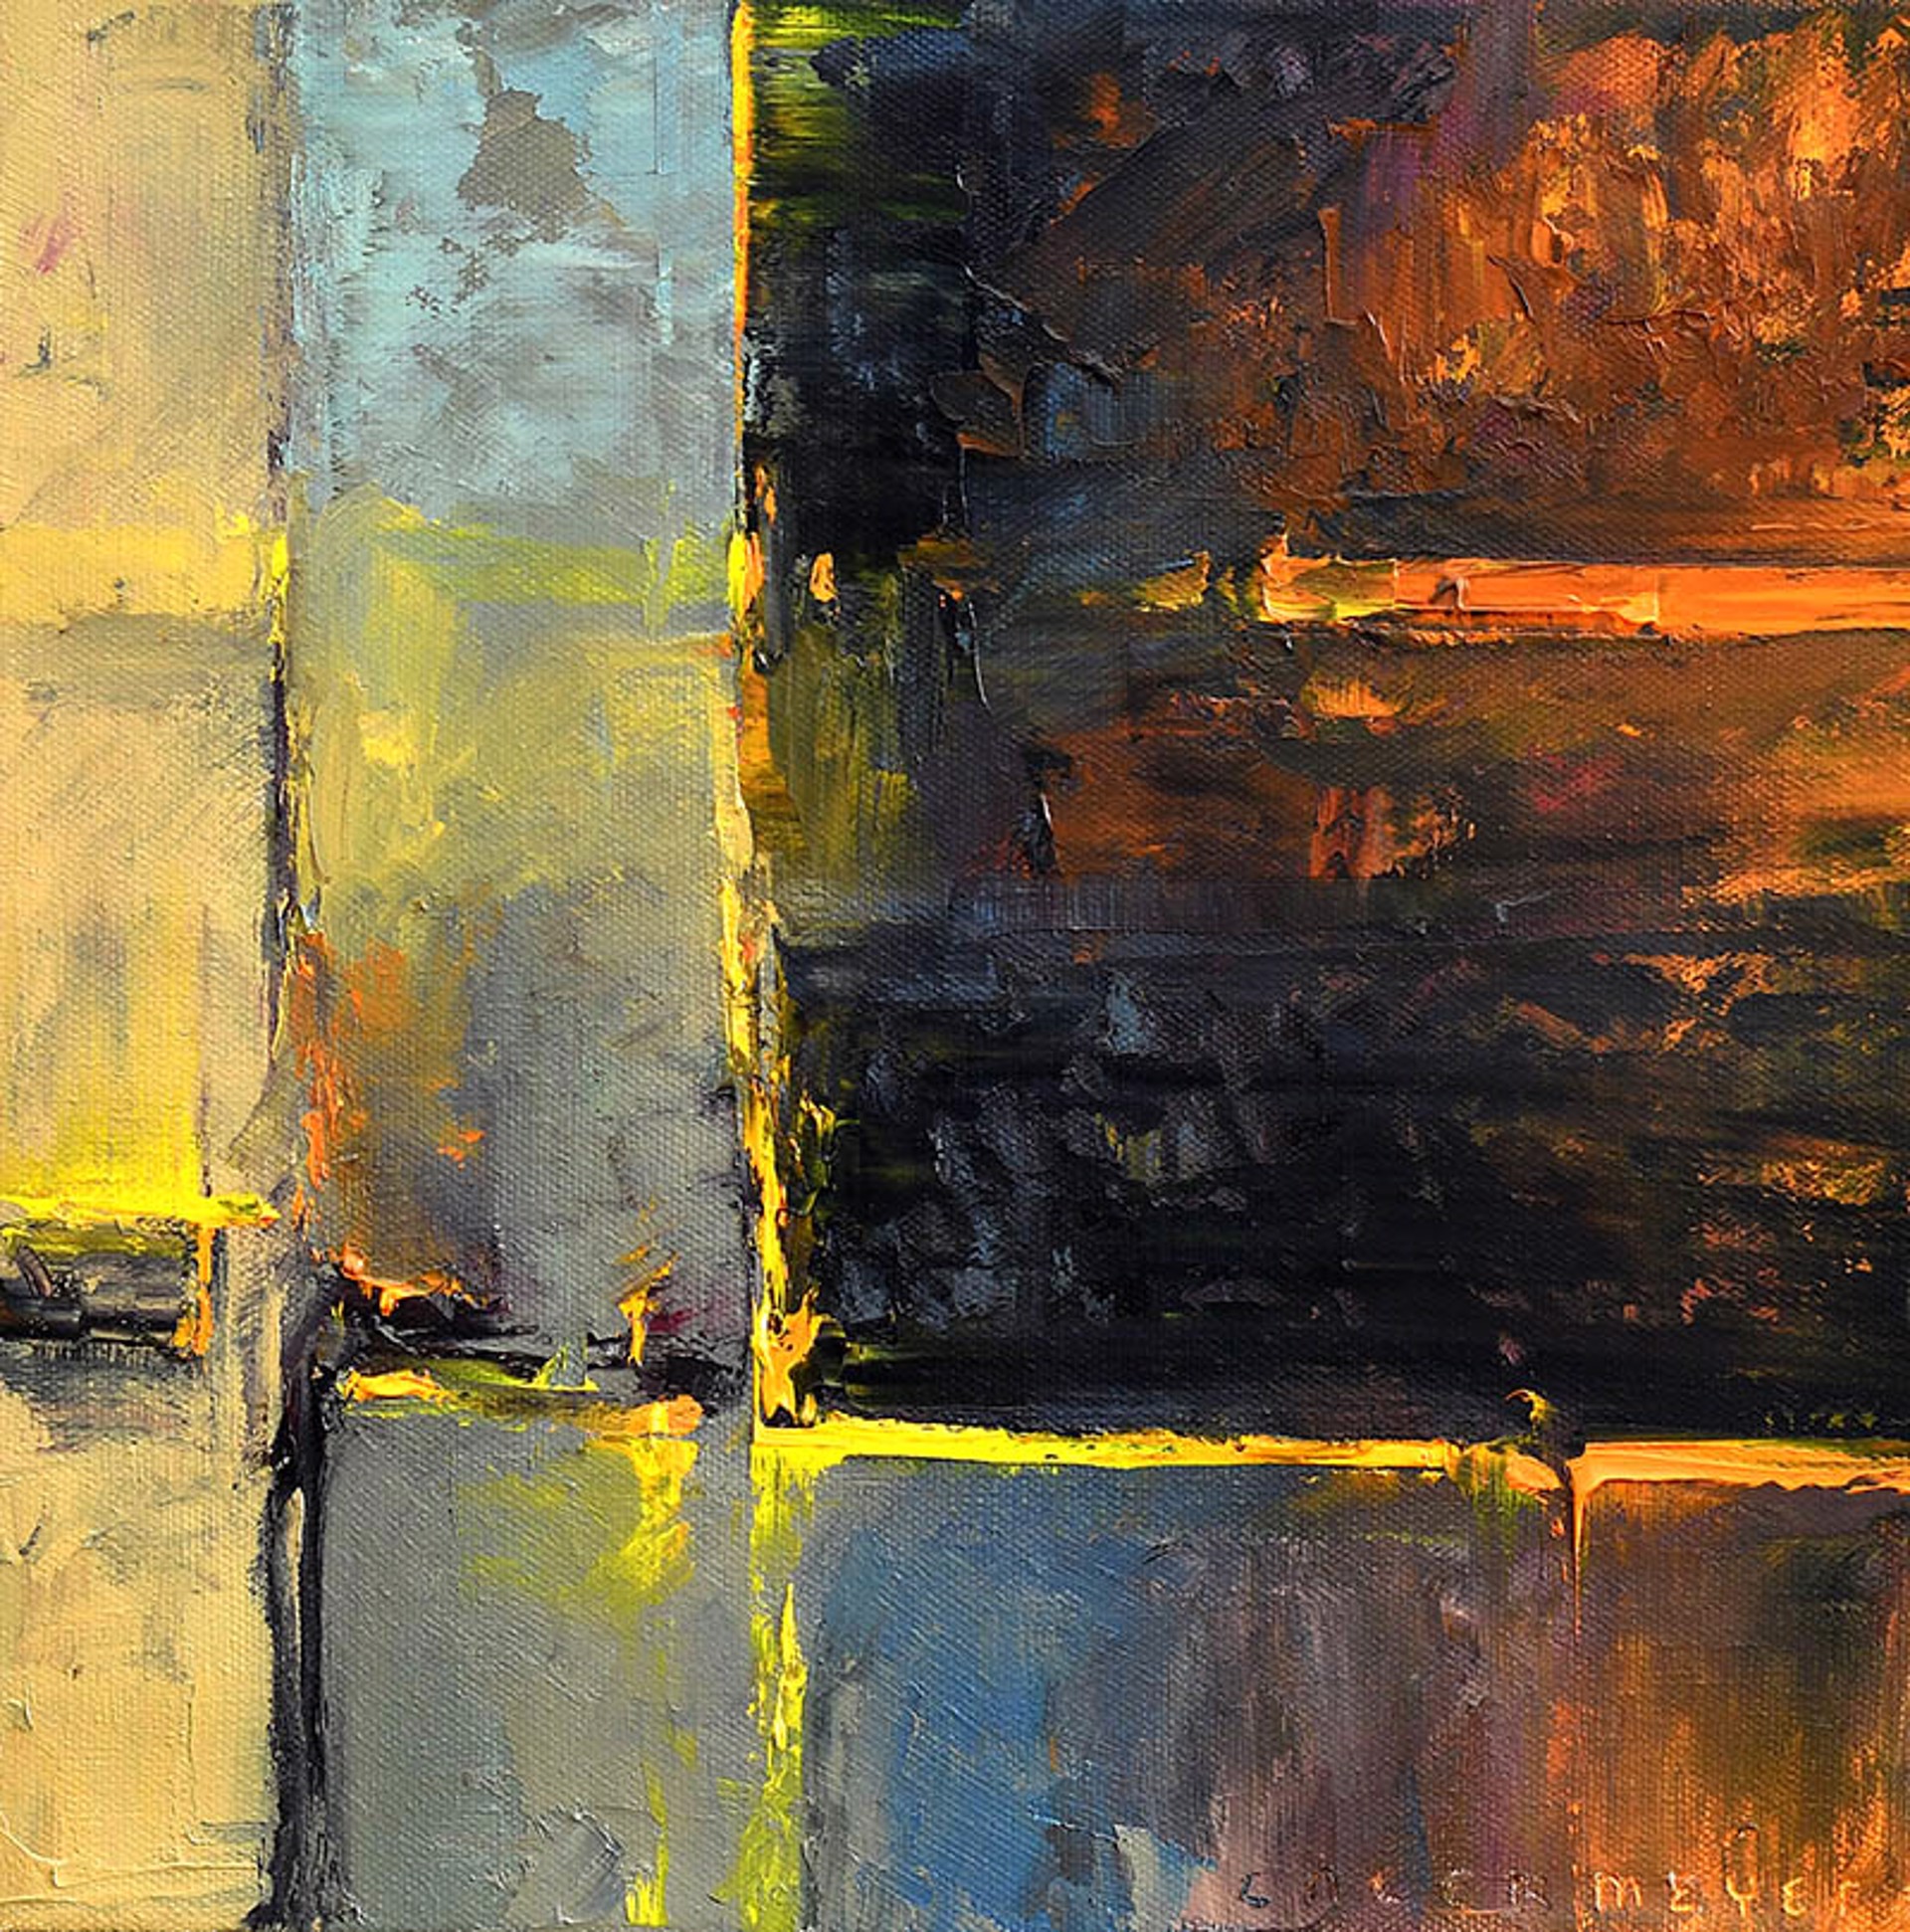 Original Oil Abstract Painting By Caleb Meyer With Angular Lines Of Light And Fields Of Color In 